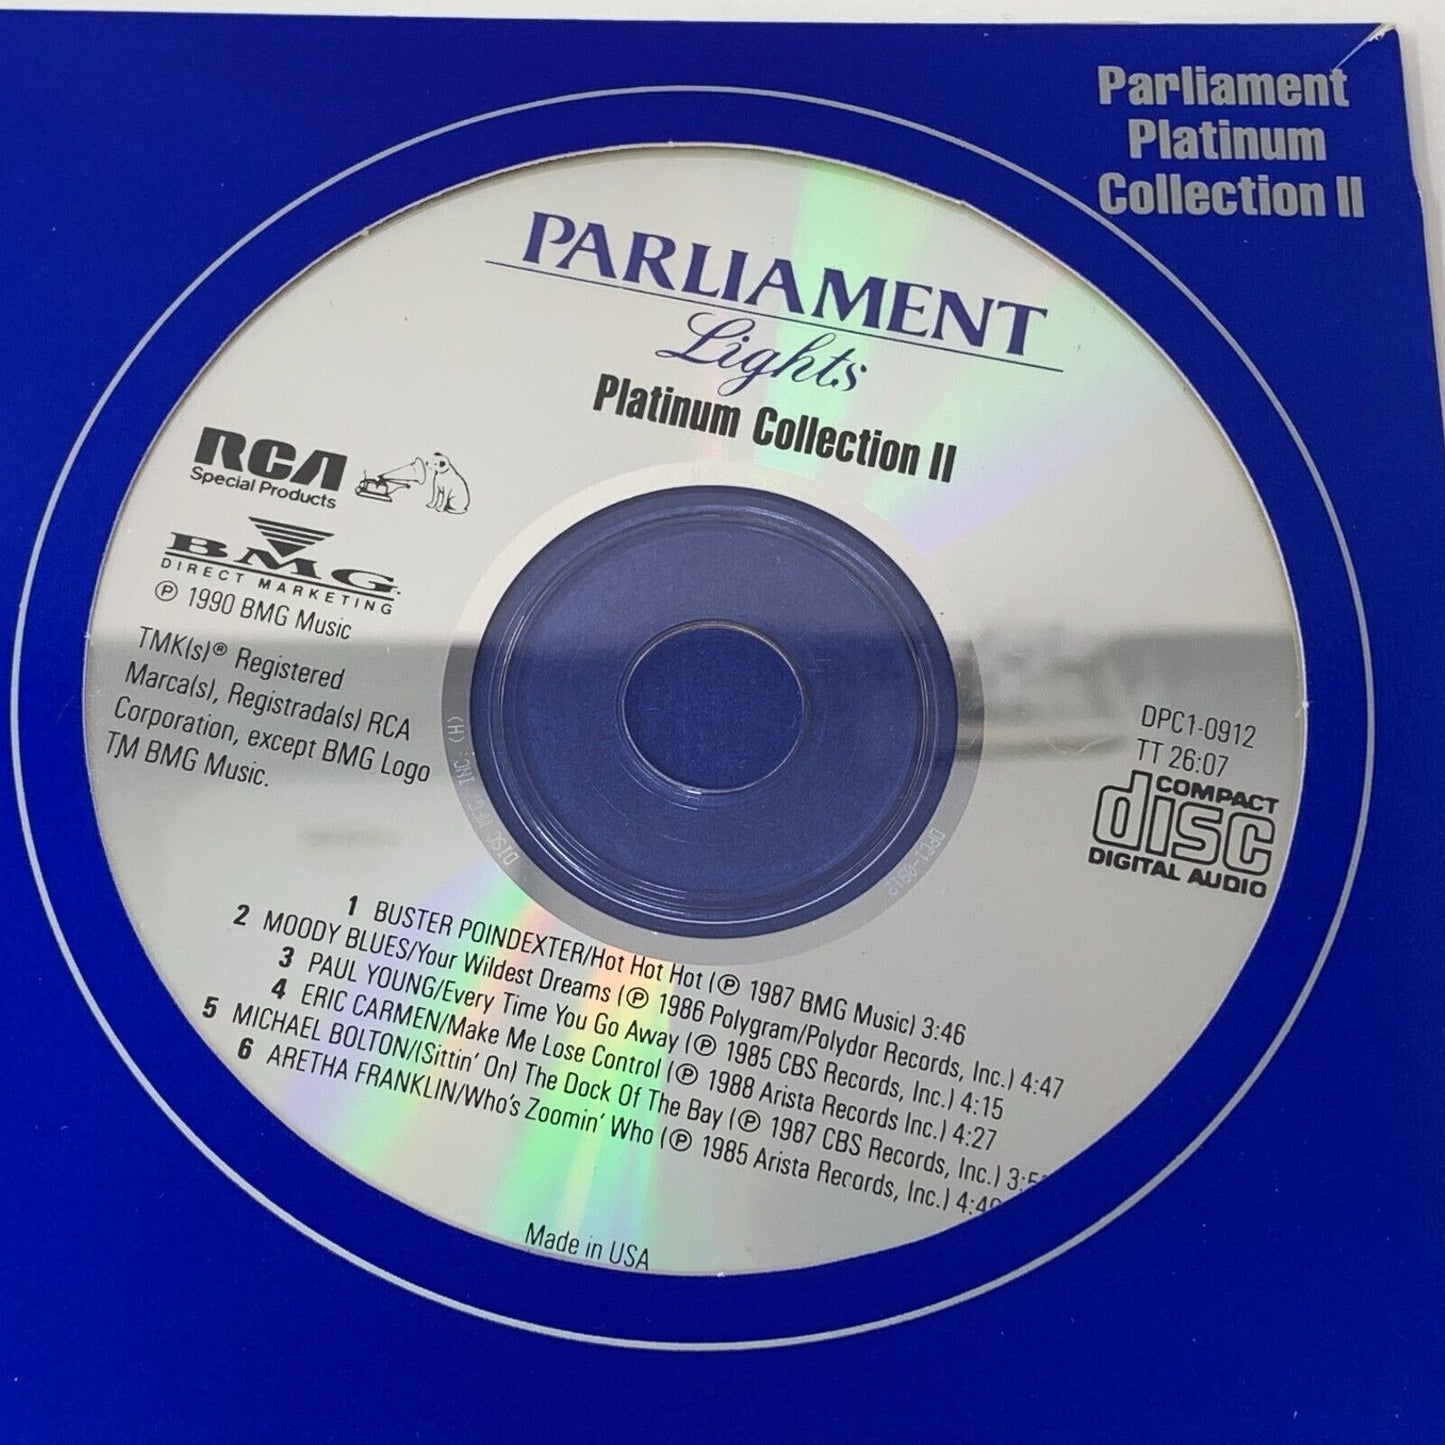 Lot of Vintage Parliament Lights Cigarettes VHS Video Tape and CD Tobacciana